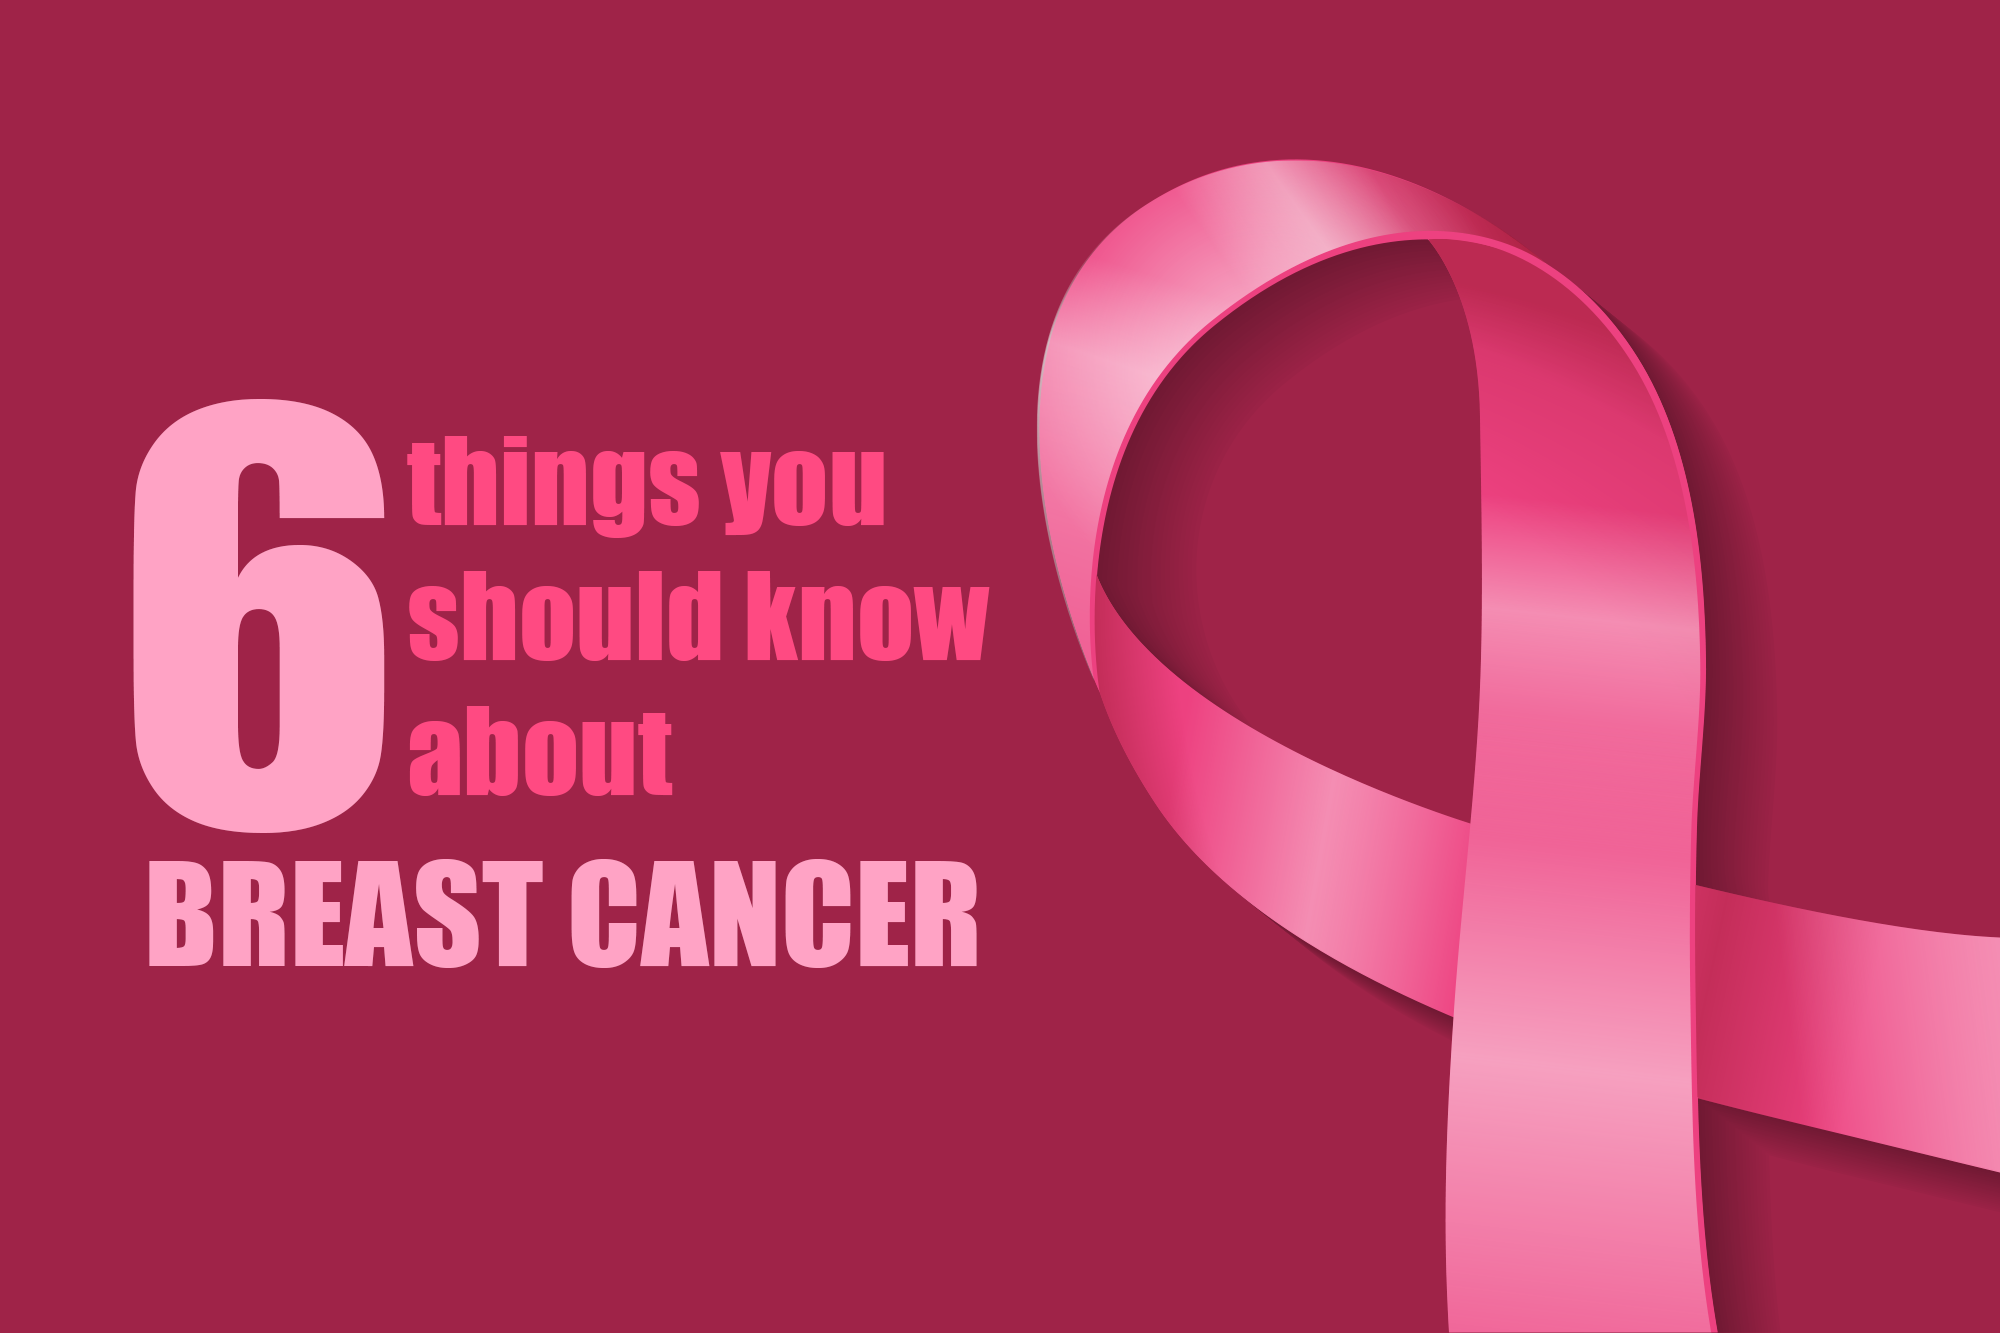 6 things you should know about Breast Cancer